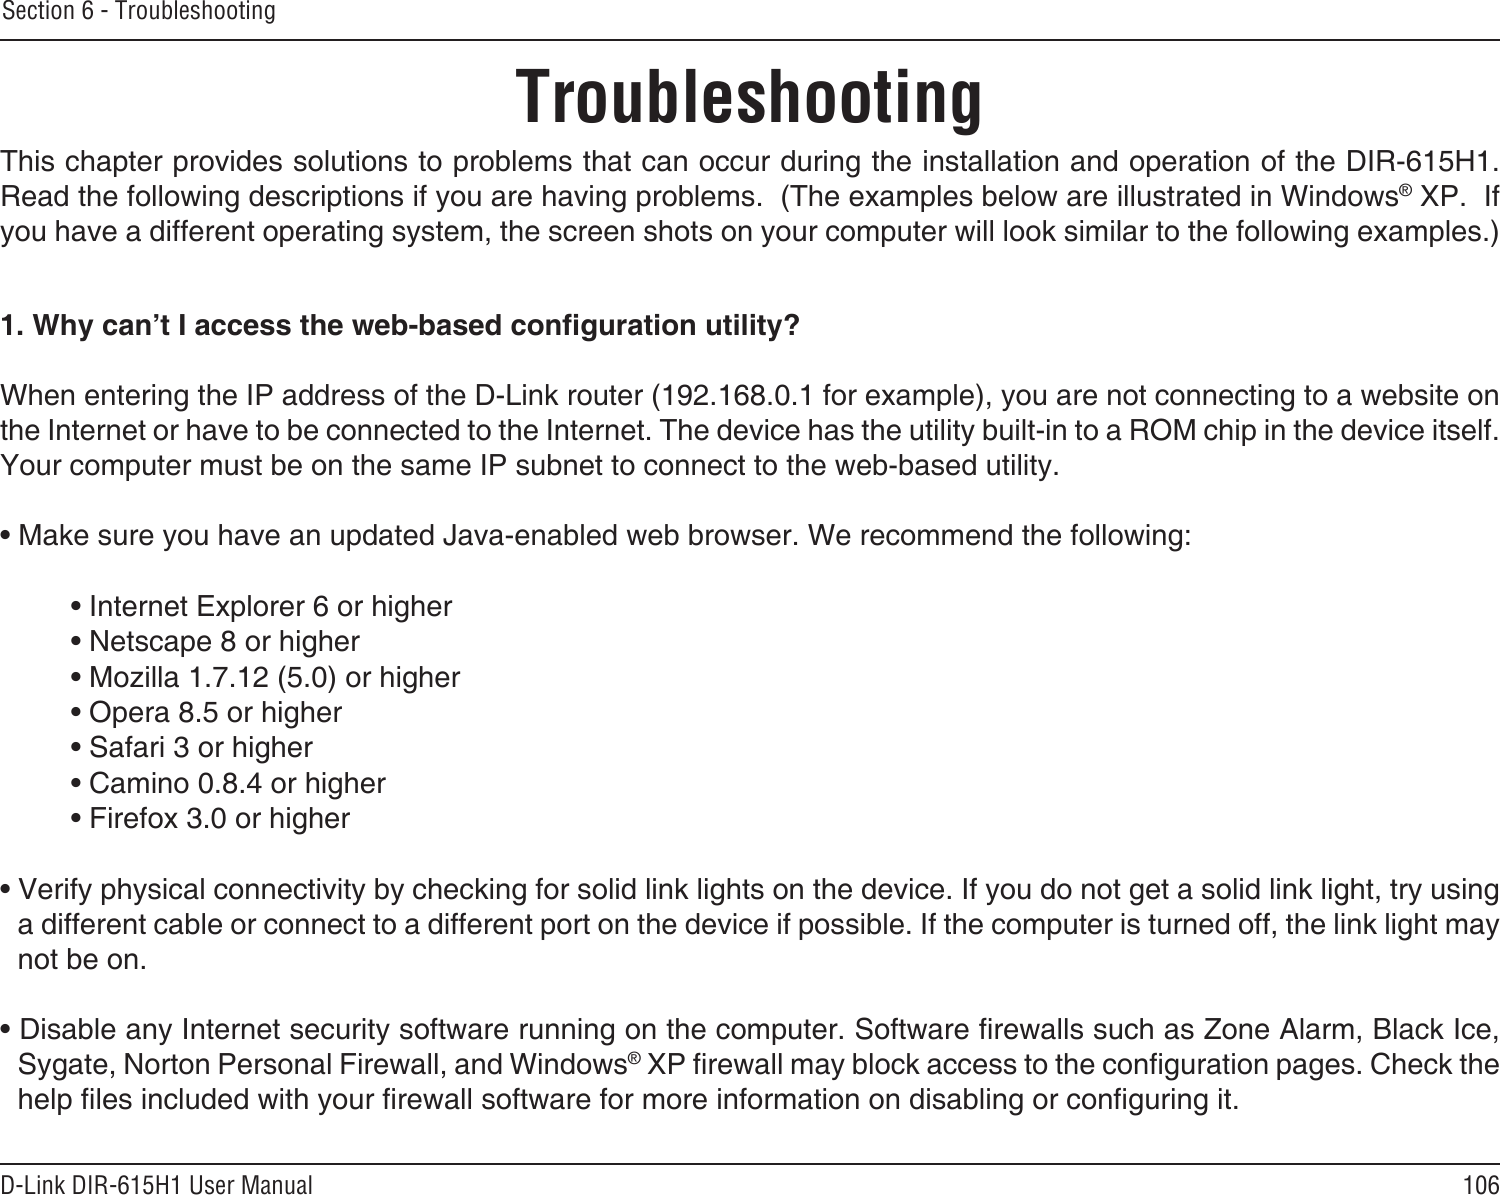 106D-Link DIR-615H1 User ManualSection 6 - TroubleshootingTroubleshootingThis chapter provides solutions to problems that can occur during the installation and operation of the DIR-615H1.  Read the following descriptions if you are having problems.  (The examples below are illustrated in Windows® XP.  If you have a different operating system, the screen shots on your computer will look similar to the following examples.)1. Why can’t I access the web-based conguration utility?When entering the IP address of the D-Link router (192.168.0.1 for example), you are not connecting to a website on the Internet or have to be connected to the Internet. The device has the utility built-in to a ROM chip in the device itself. Your computer must be on the same IP subnet to connect to the web-based utility. • Make sure you have an updated Java-enabled web browser. We recommend the following: • Internet Explorer 6 or higher • Netscape 8 or higher • Mozilla 1.7.12 (5.0) or higher • Opera 8.5 or higher • Safari 3 or higher • Camino 0.8.4 or higher • Firefox 3.0 or higher • Verify physical connectivity by checking for solid link lights on the device. If you do not get a solid link light, try using a different cable or connect to a different port on the device if possible. If the computer is turned off, the link light may not be on.• Disable any Internet security software running on the computer. Software rewalls such as Zone Alarm, Black Ice, Sygate, Norton Personal Firewall, and Windows® XP rewall may block access to the conguration pages. Check the help les included with your rewall software for more information on disabling or conguring it.